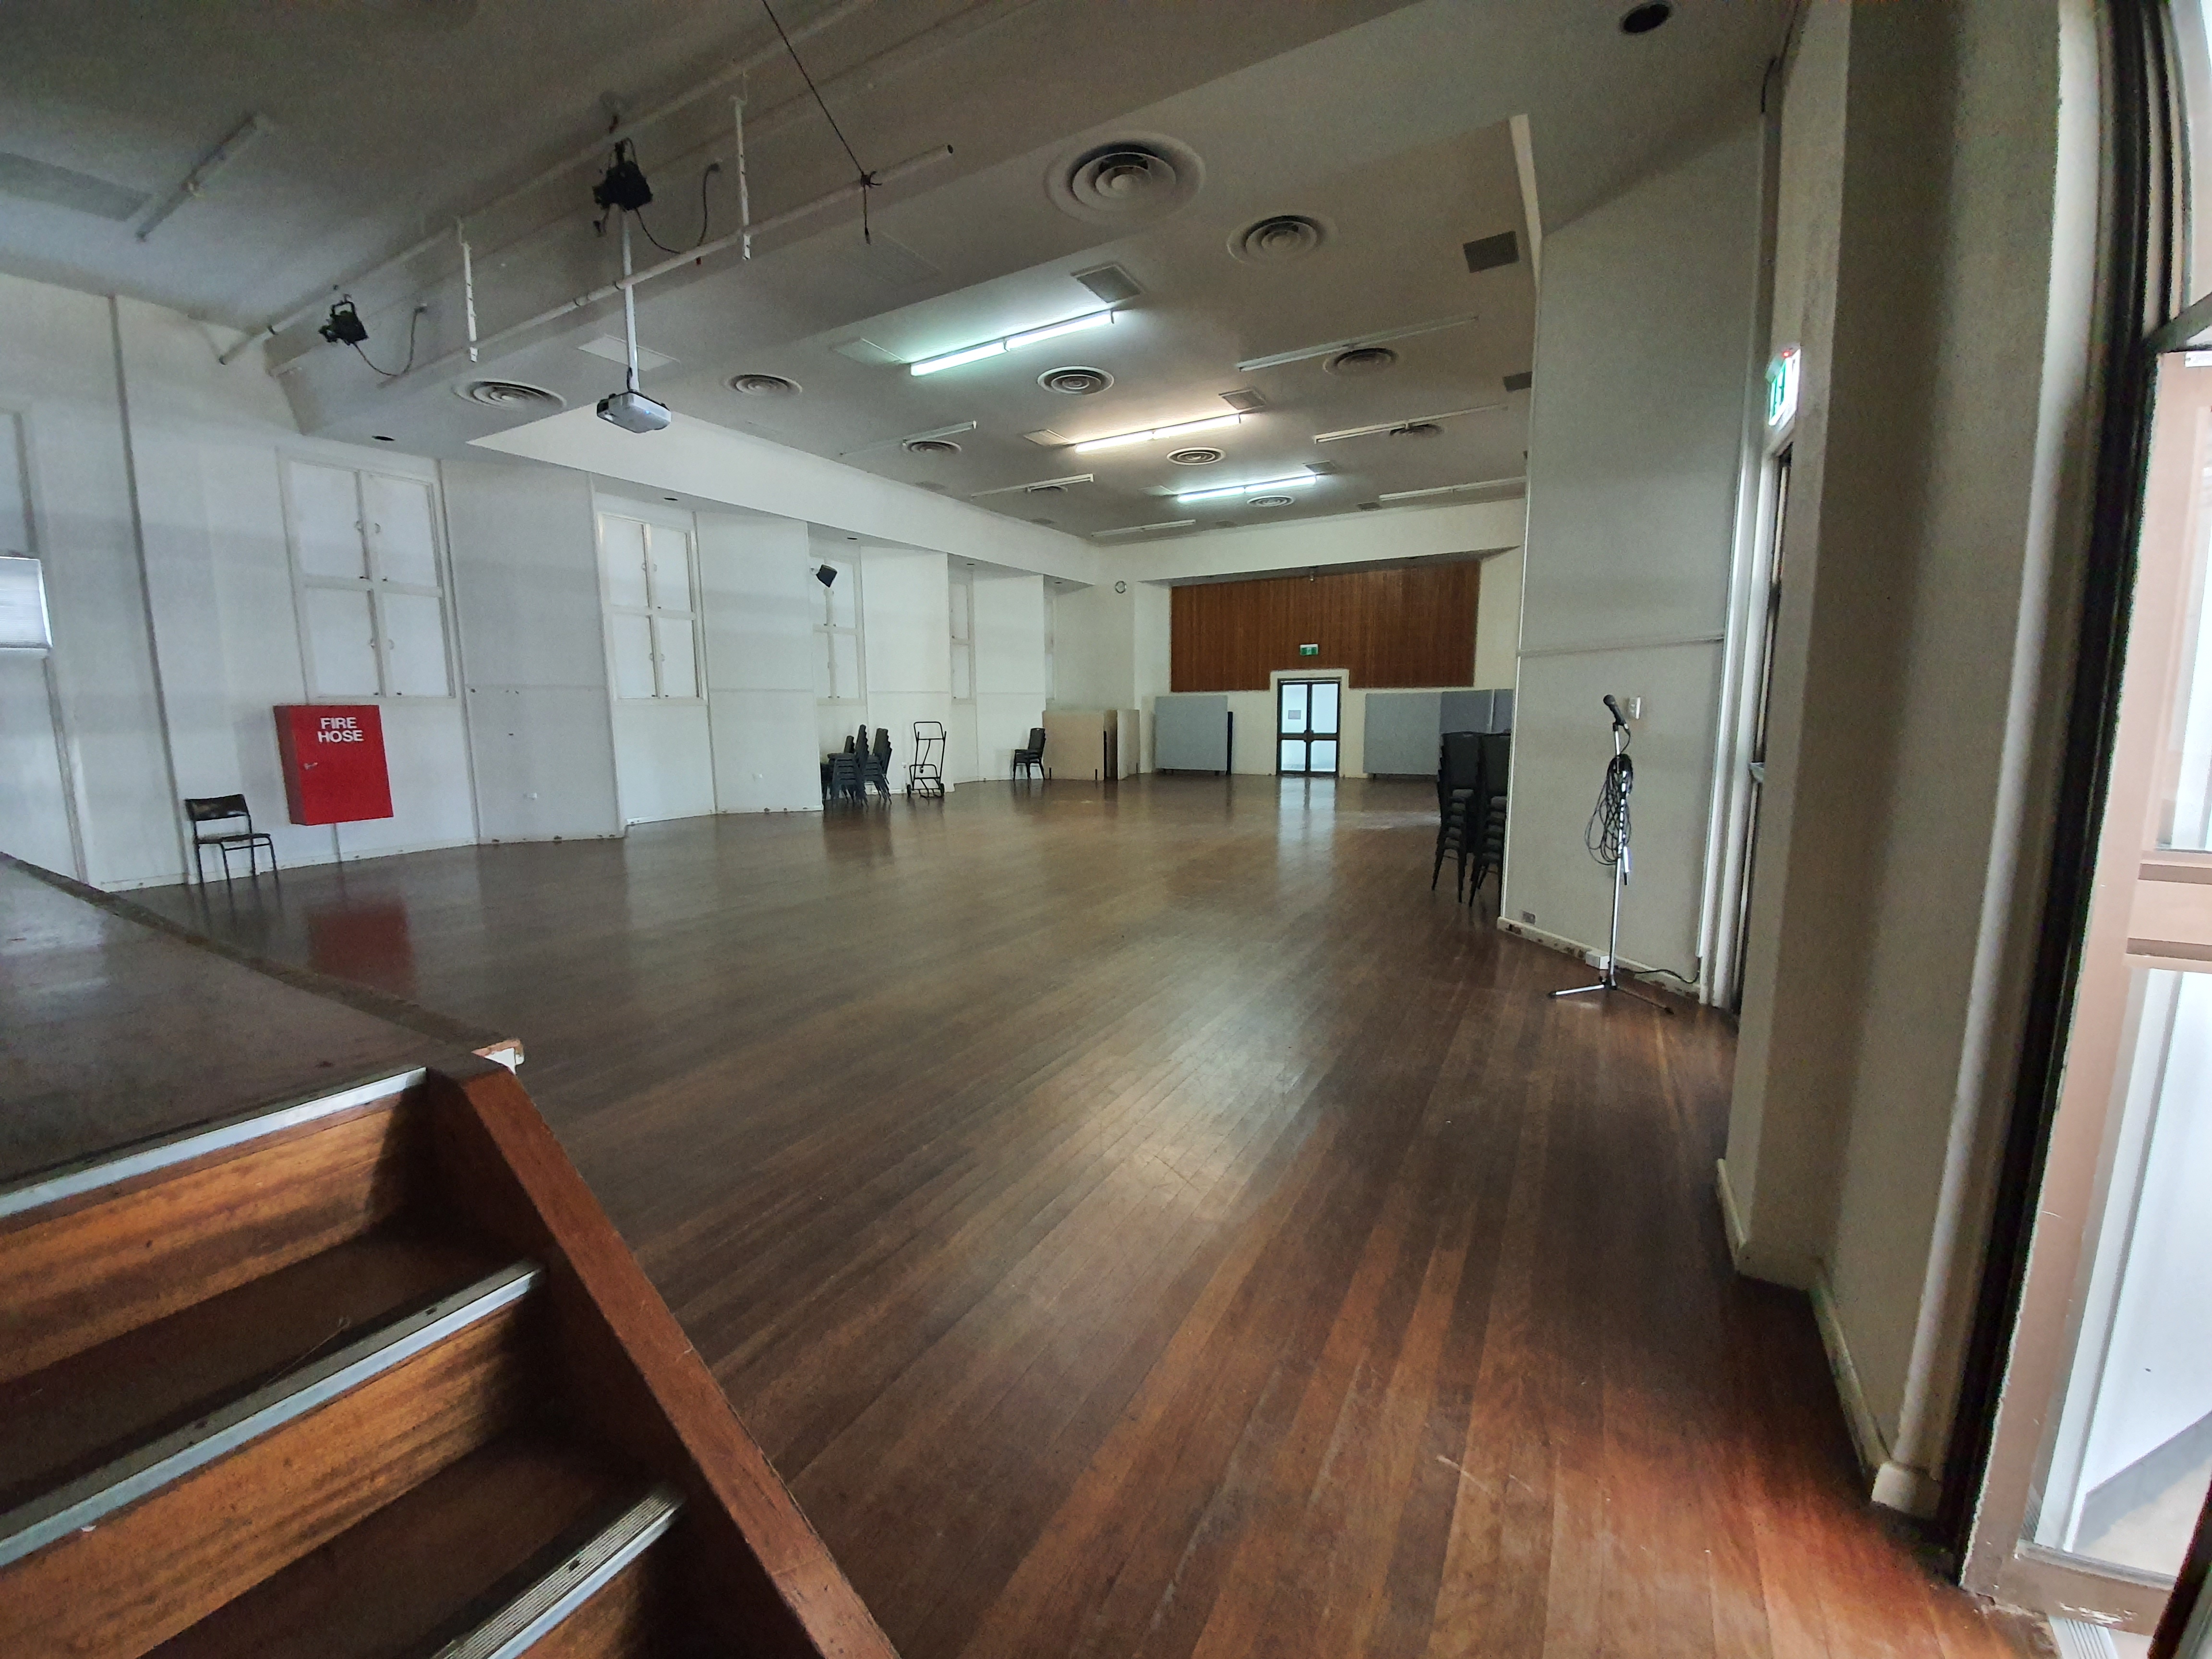 St George Cultural Centre Hall 2